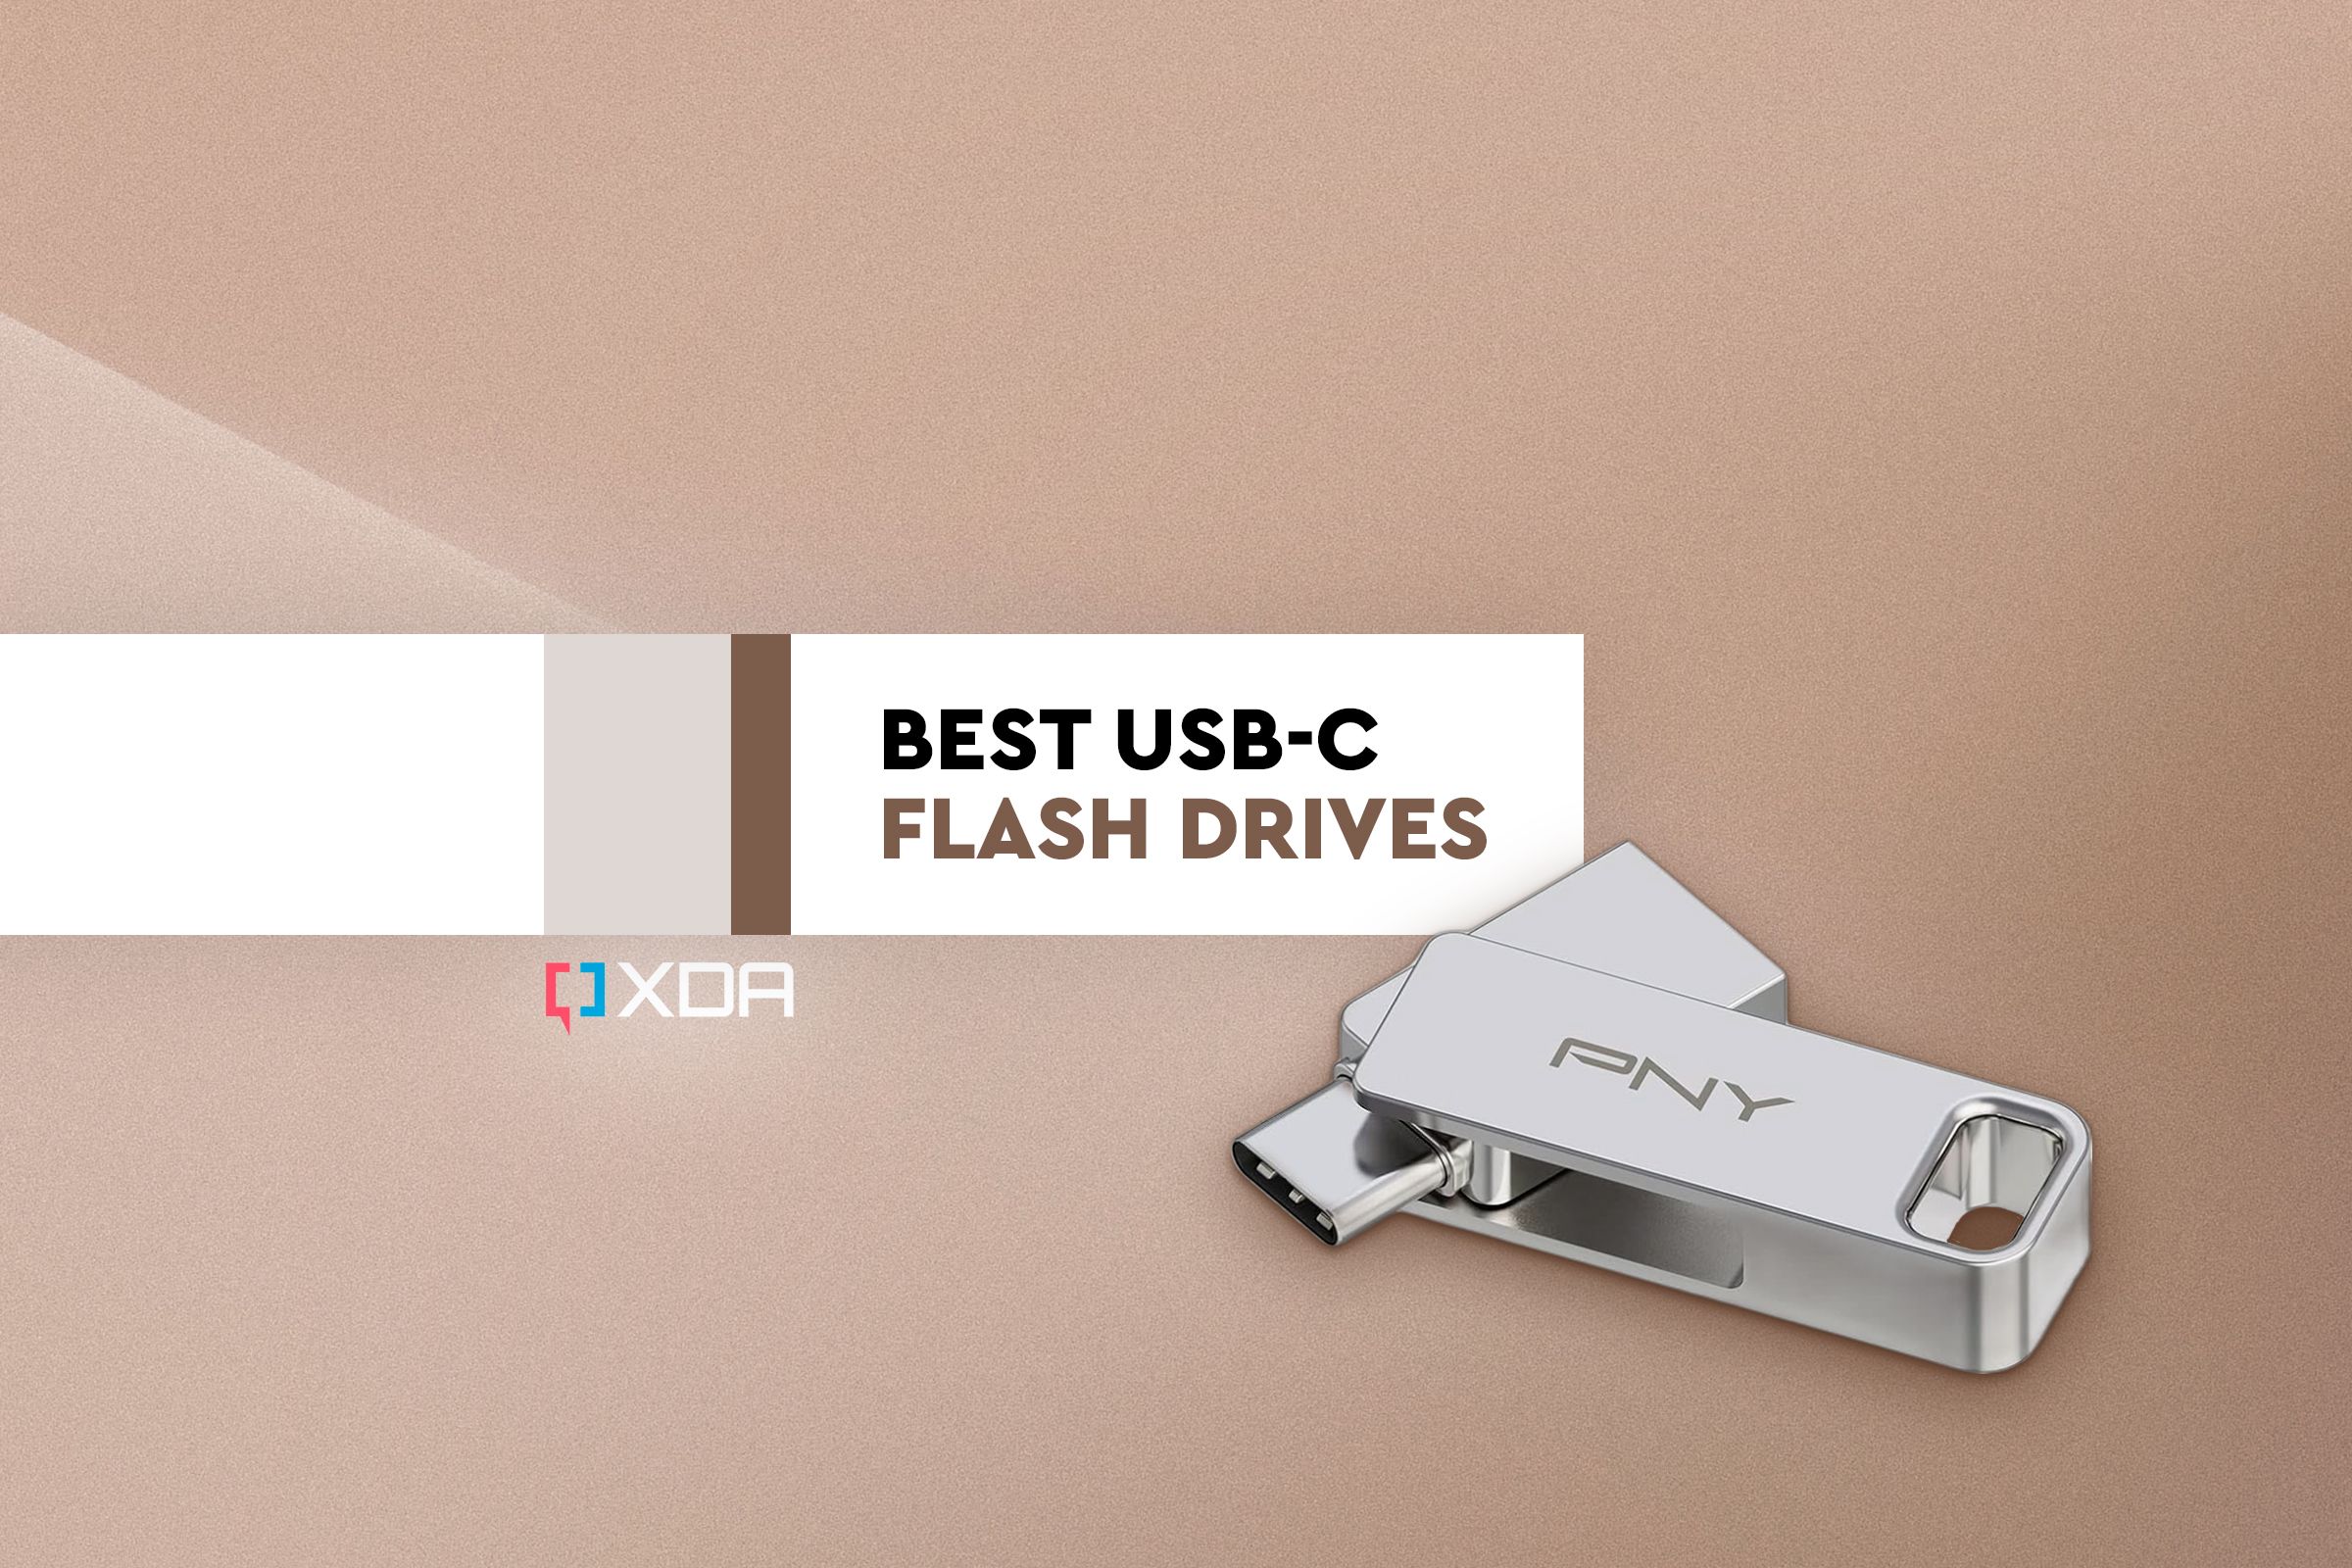 Header image of a PNY USB C Flash Drive containing text 